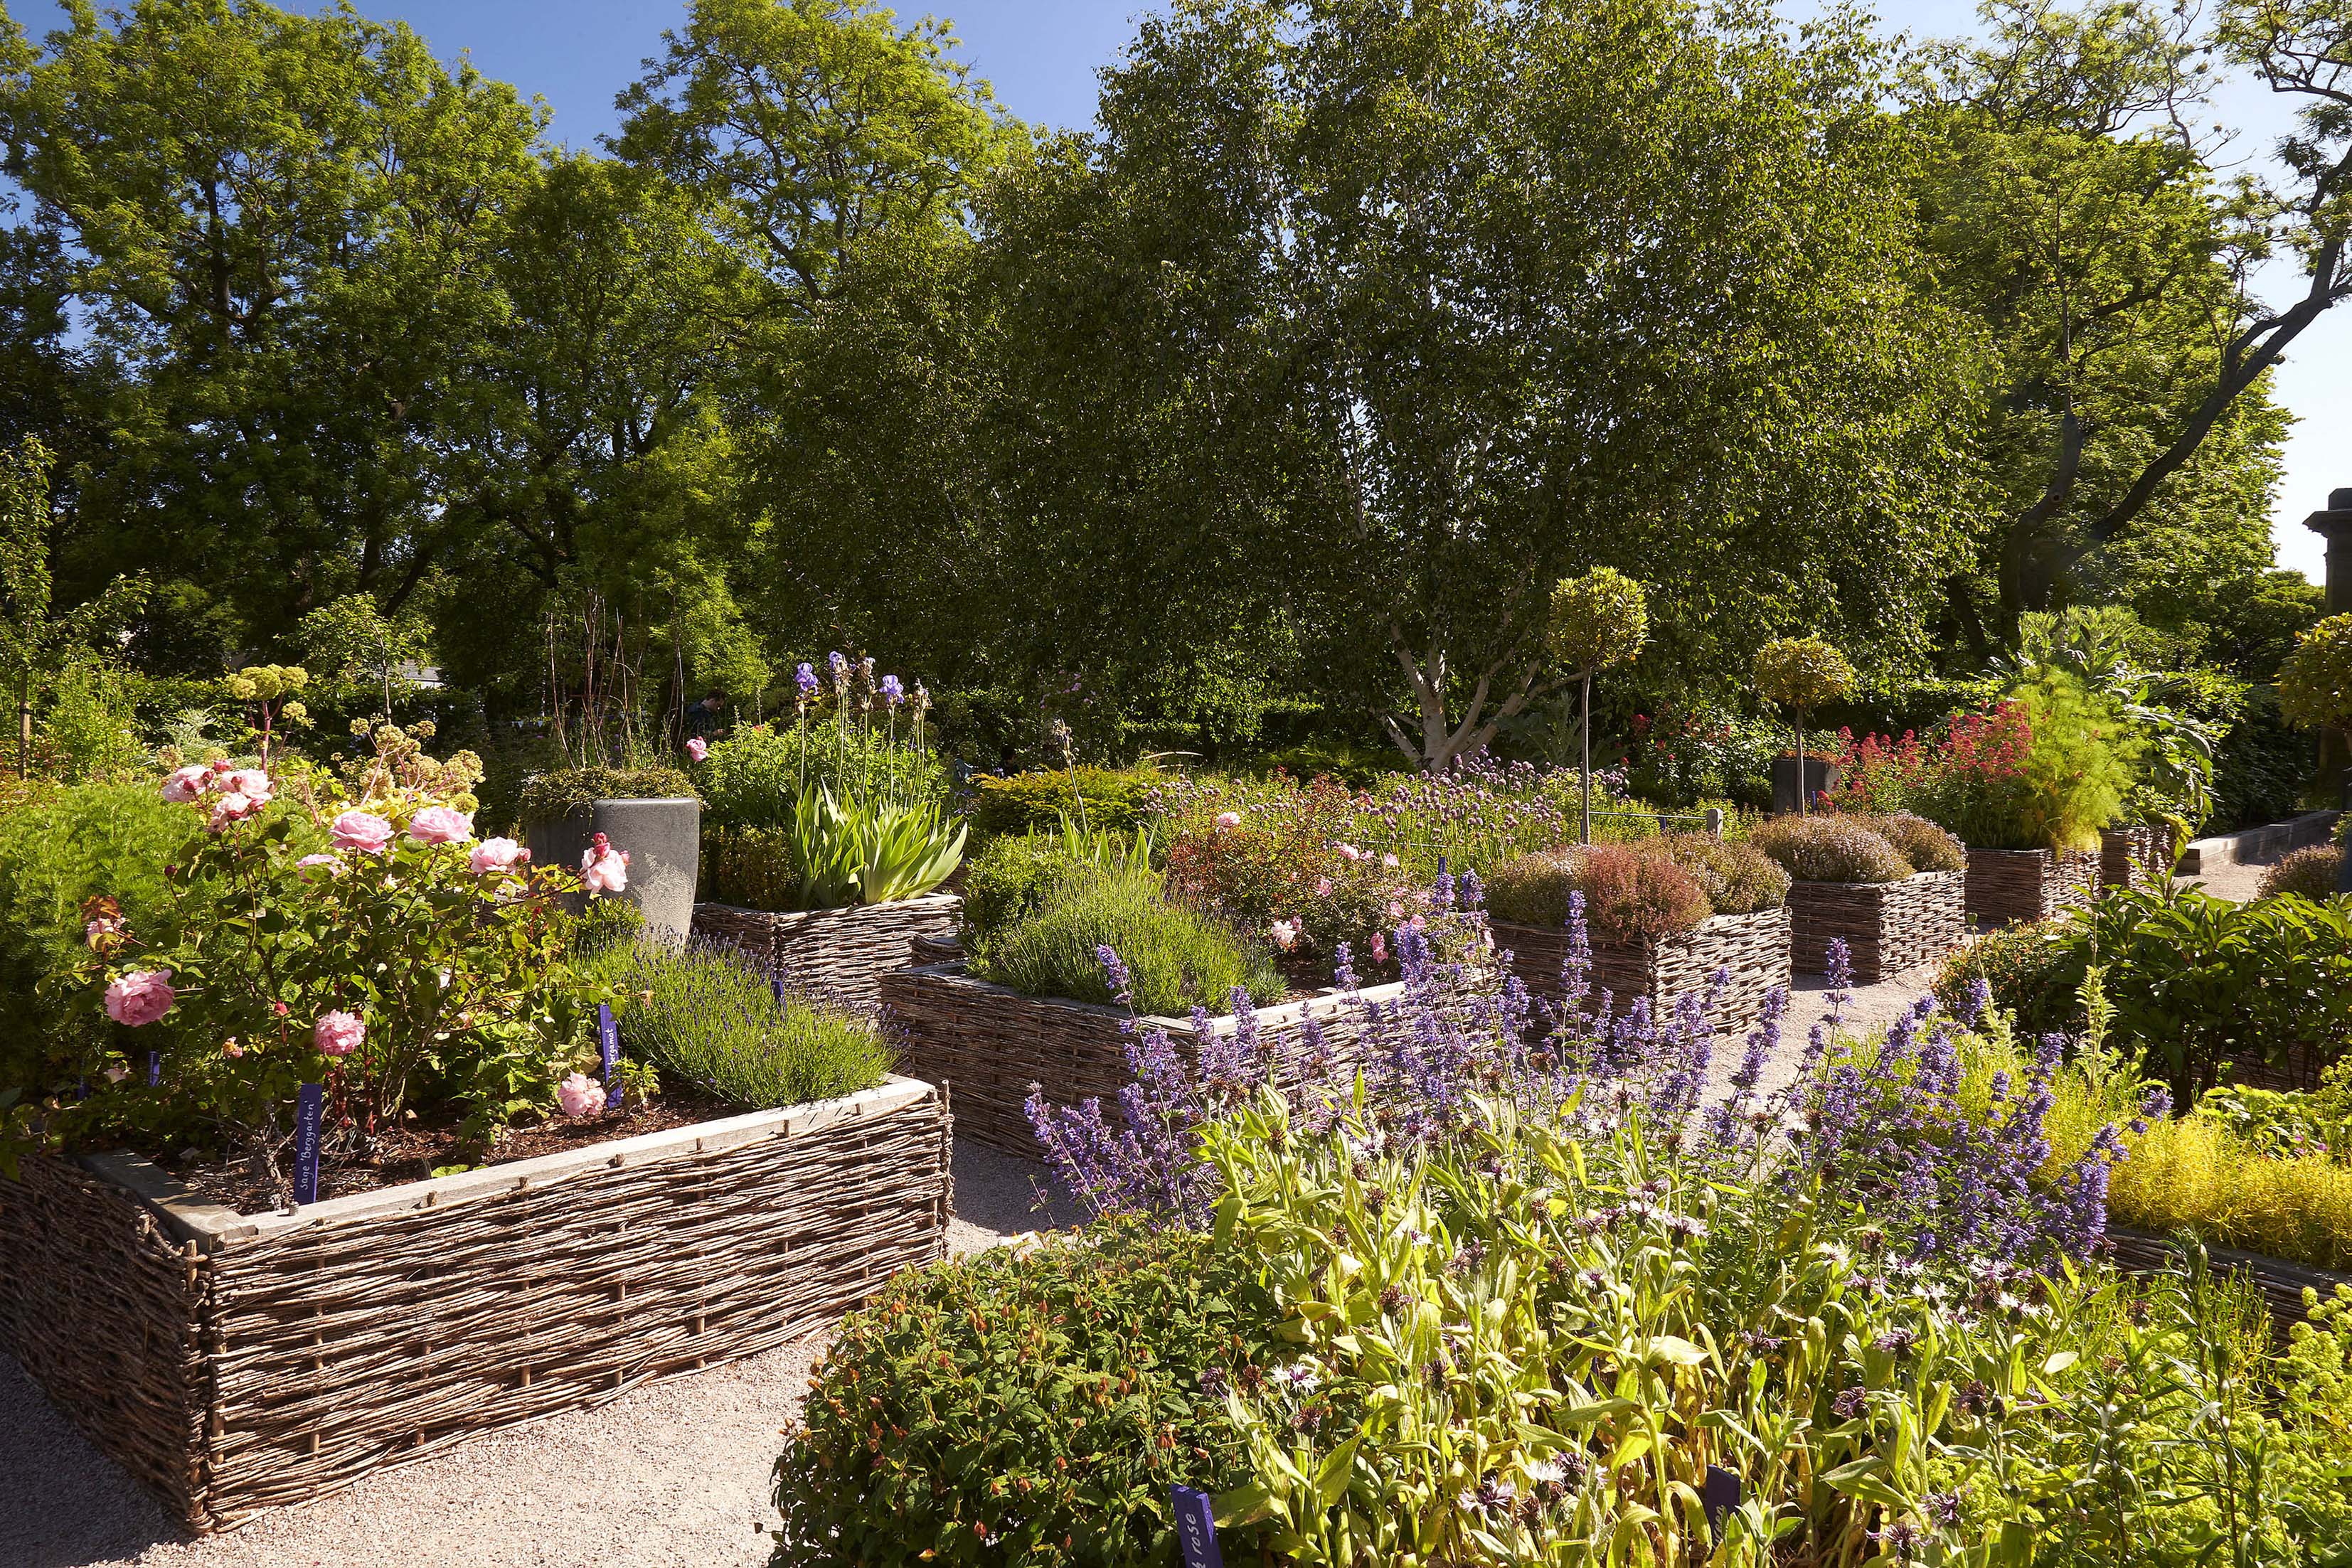 A view of the plants and herbs growing in raised beds in the Physic Garden on a sunny day